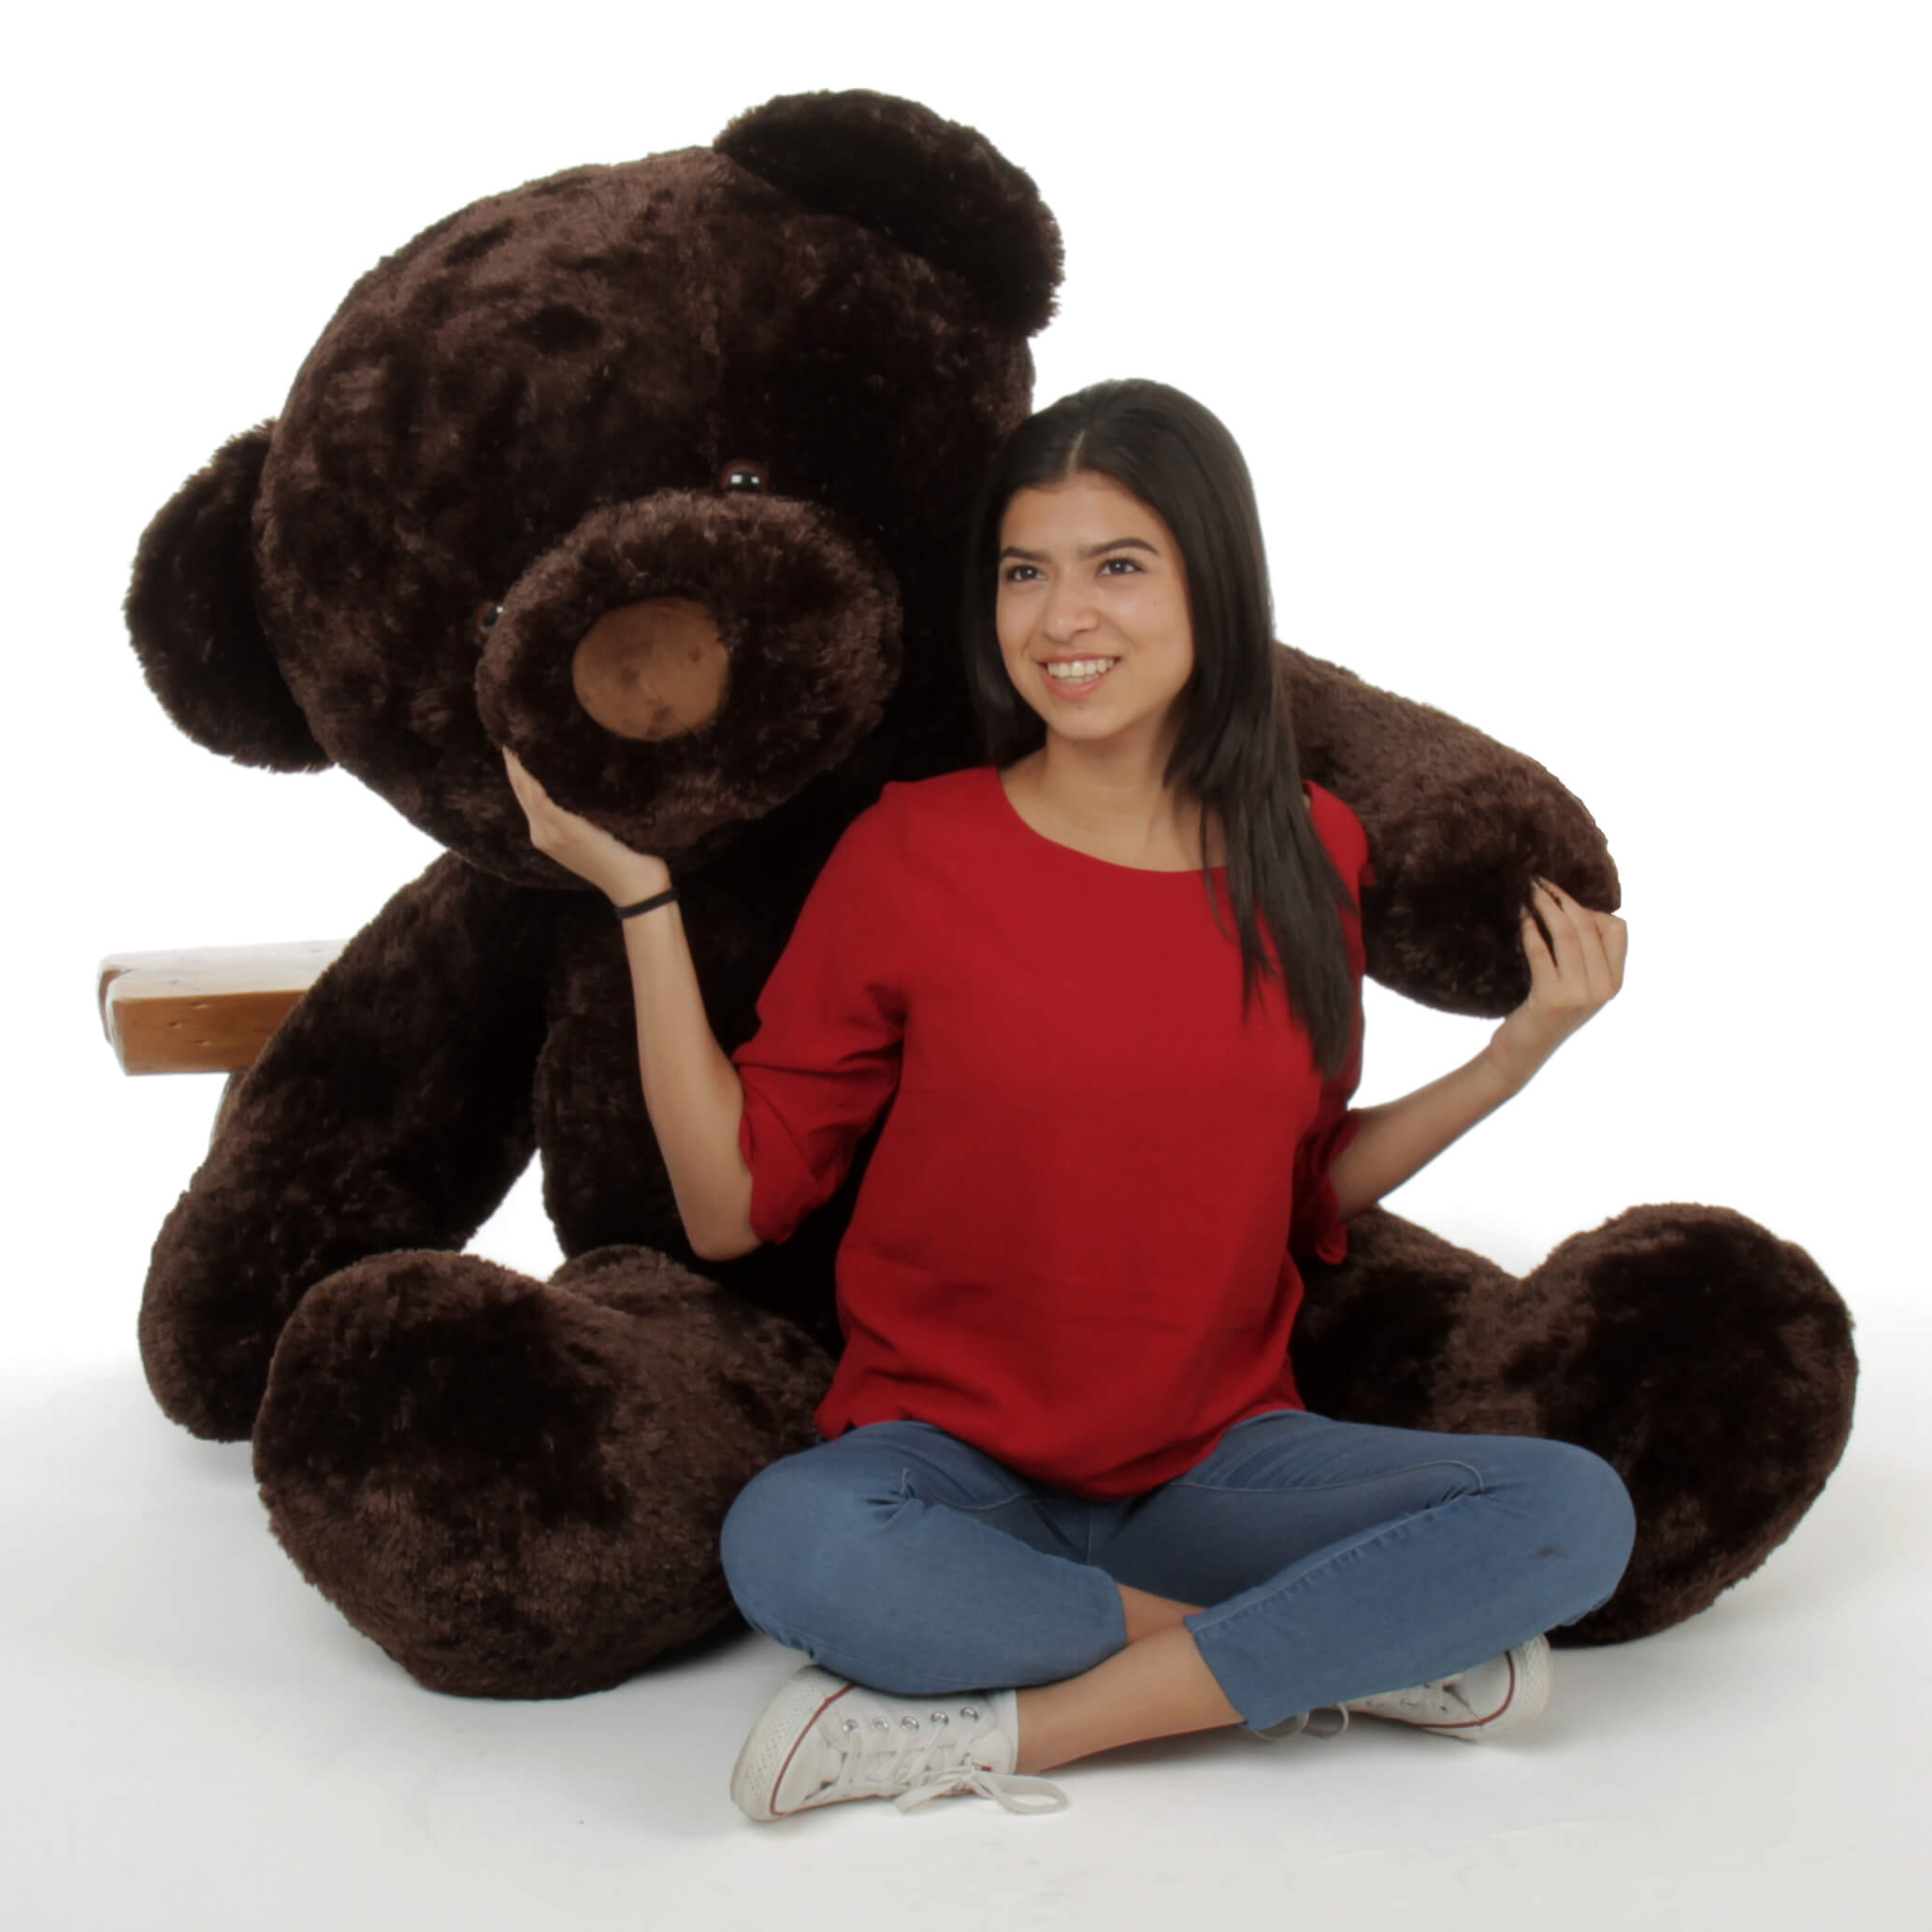 life-size-giant-teddy-bear-awesomeness-60n-soft-dark-brown-fur-munchkin-chubs-gift-to-remember-forever-1.jpg